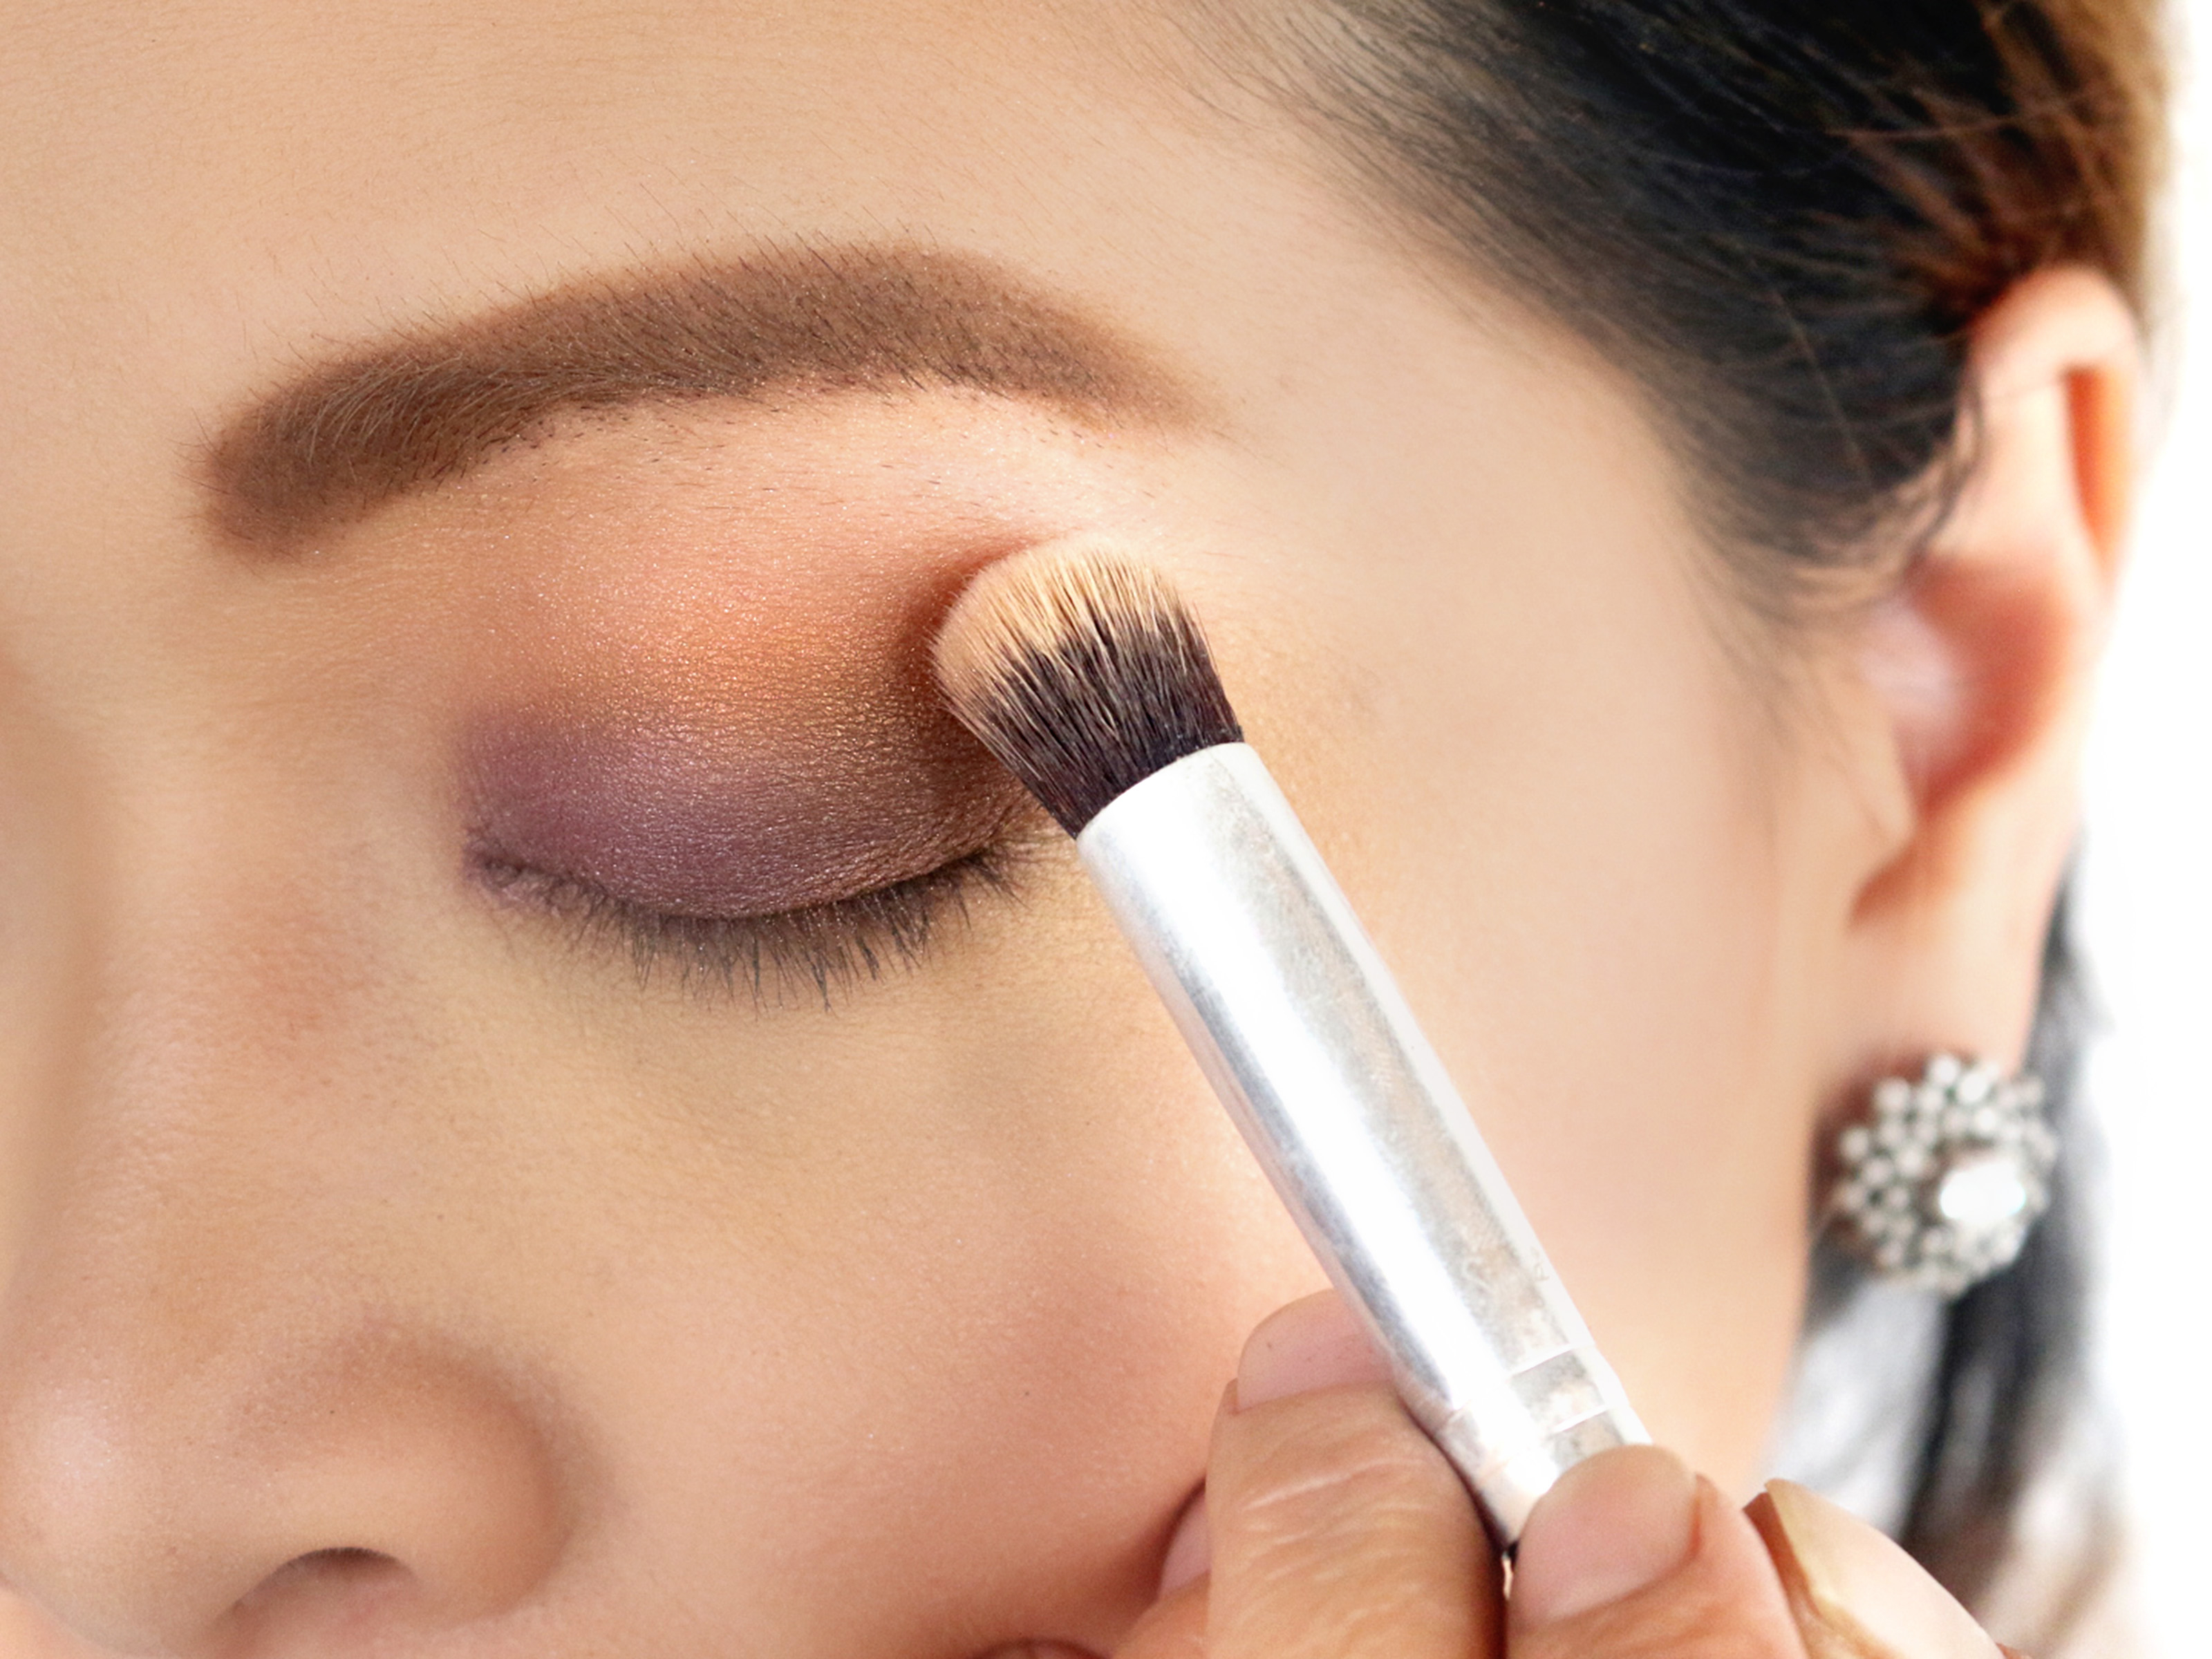 Best Makeup For Brown Eyes How To Find The Best Eyeshadow For Your Eyes 11 Steps